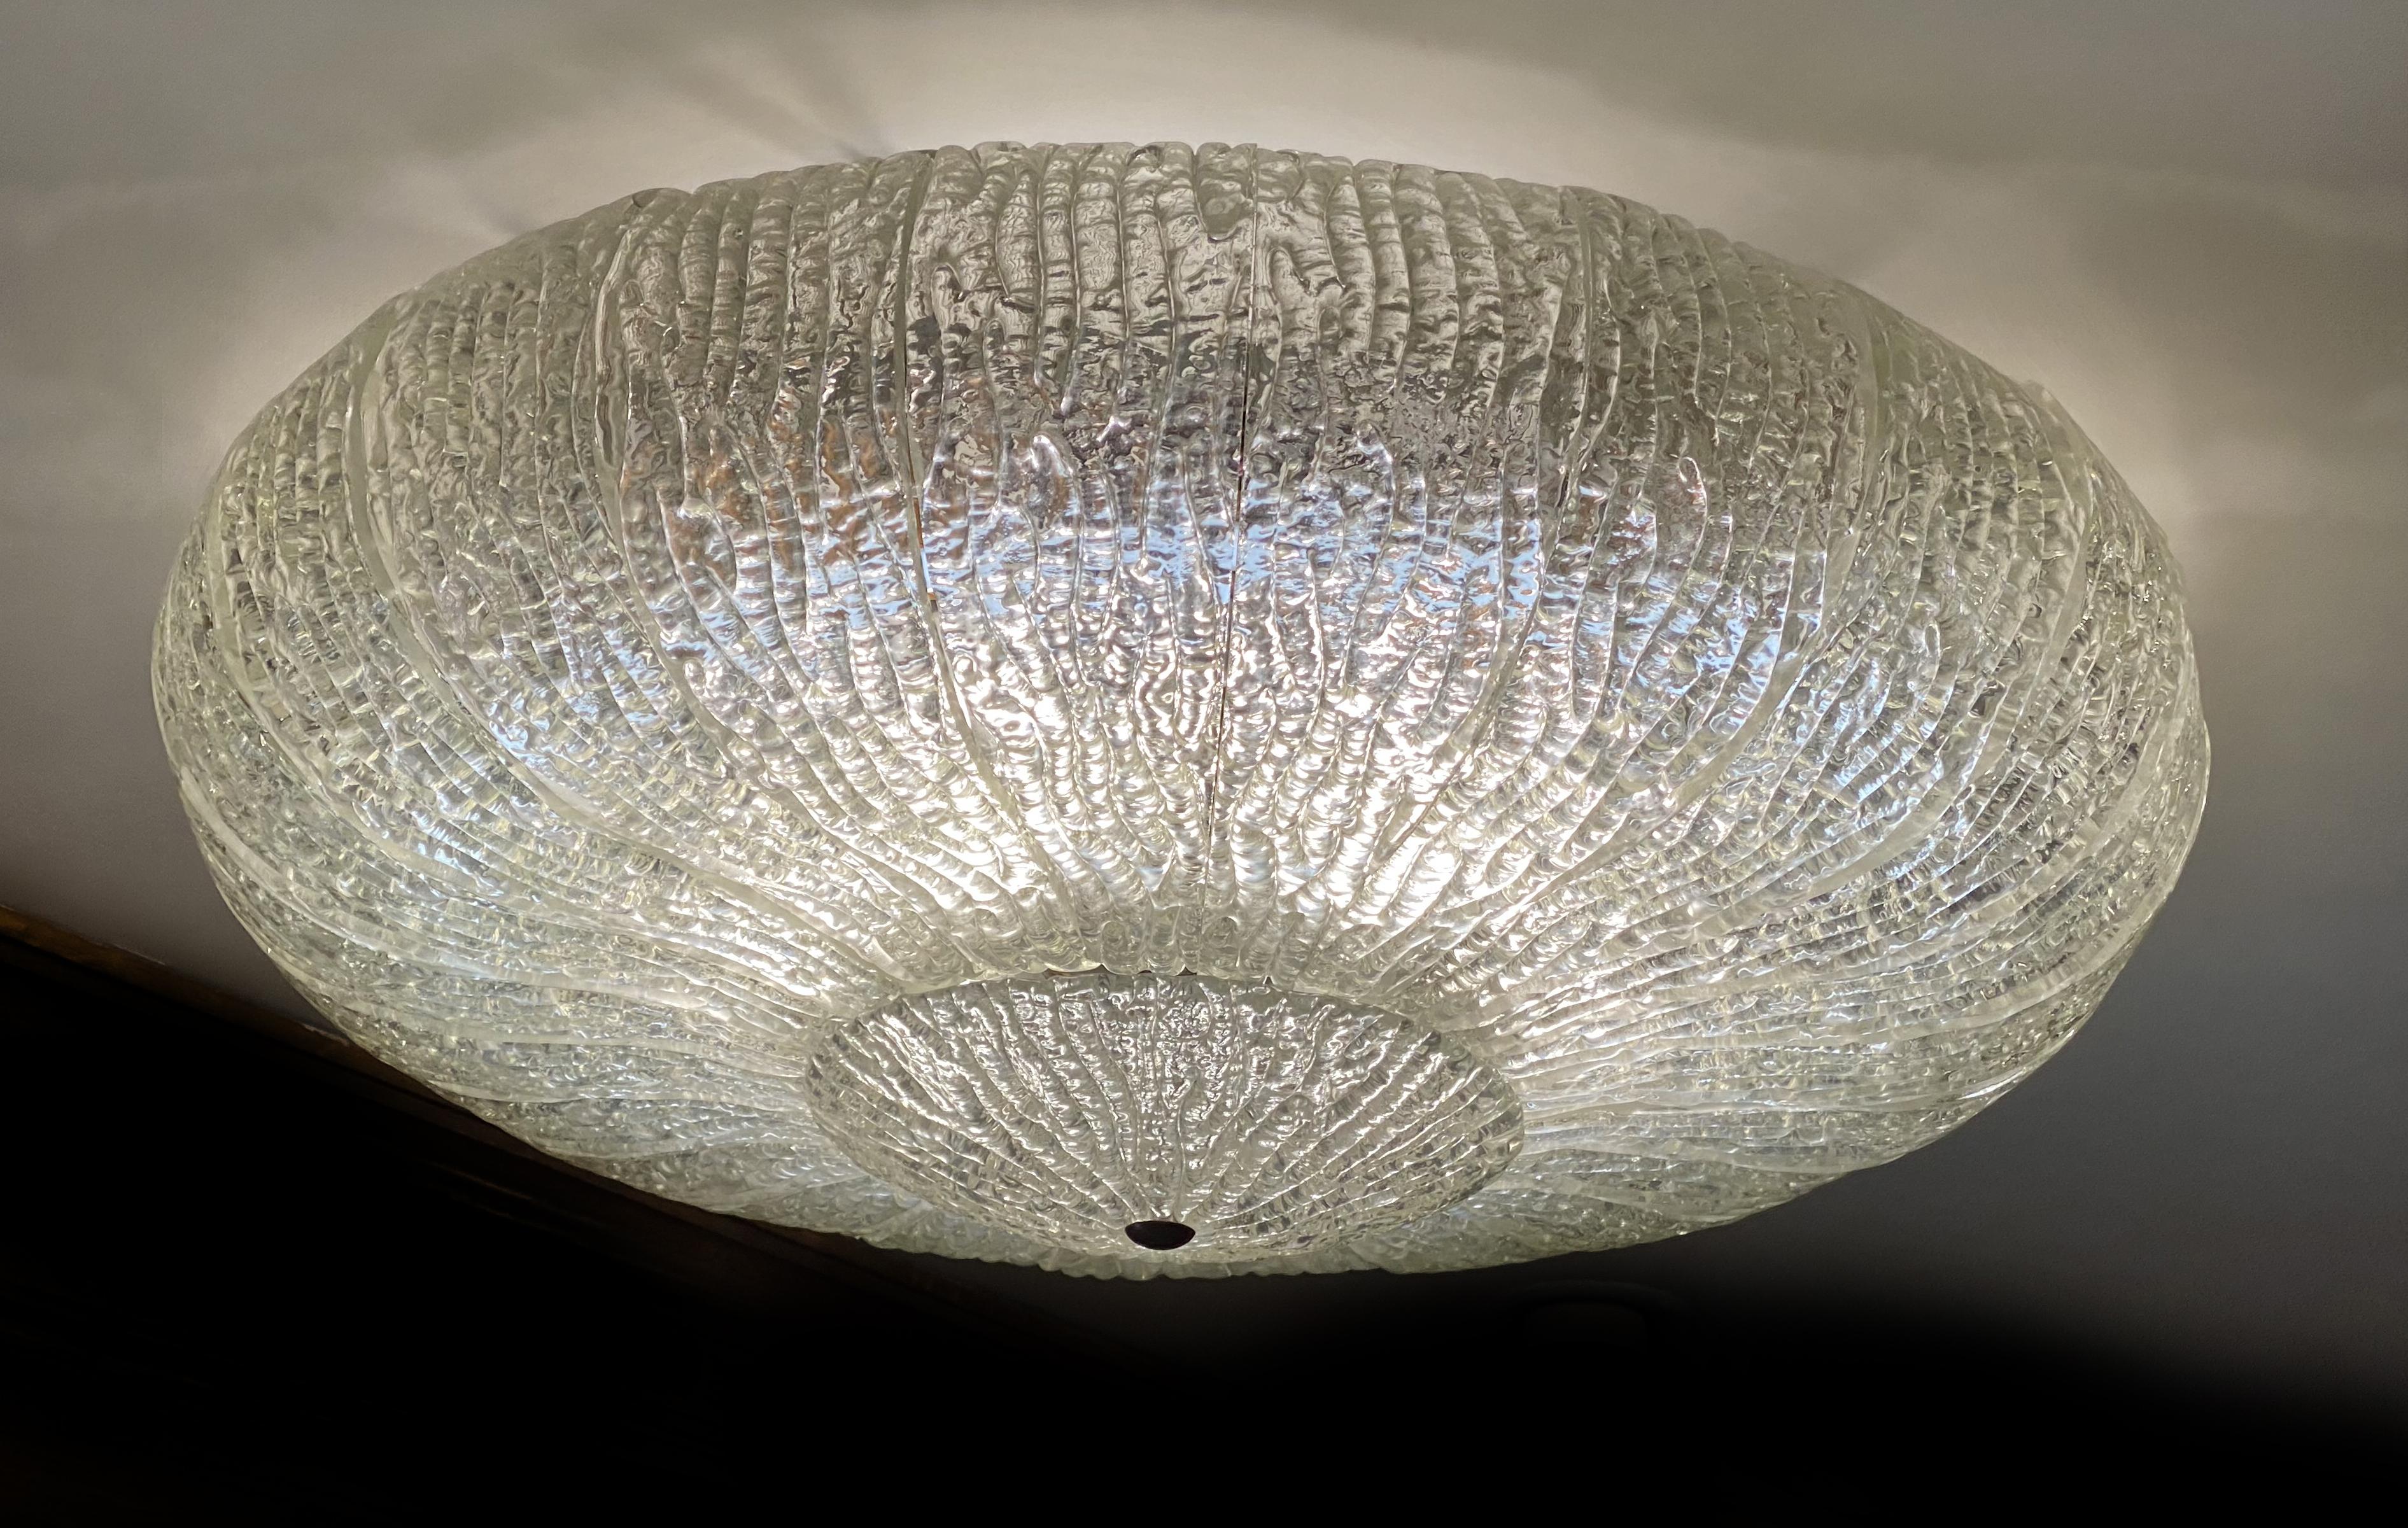 Fantastic and original pair Barovier & Toso Murano Italy art glass ceiling lights. The rare lamp is made of 26 mouth-blown hand-formed leaf-form ice glass panels plus a huge glass as a bottom. The wiring is perfect, which has been replaced in recent